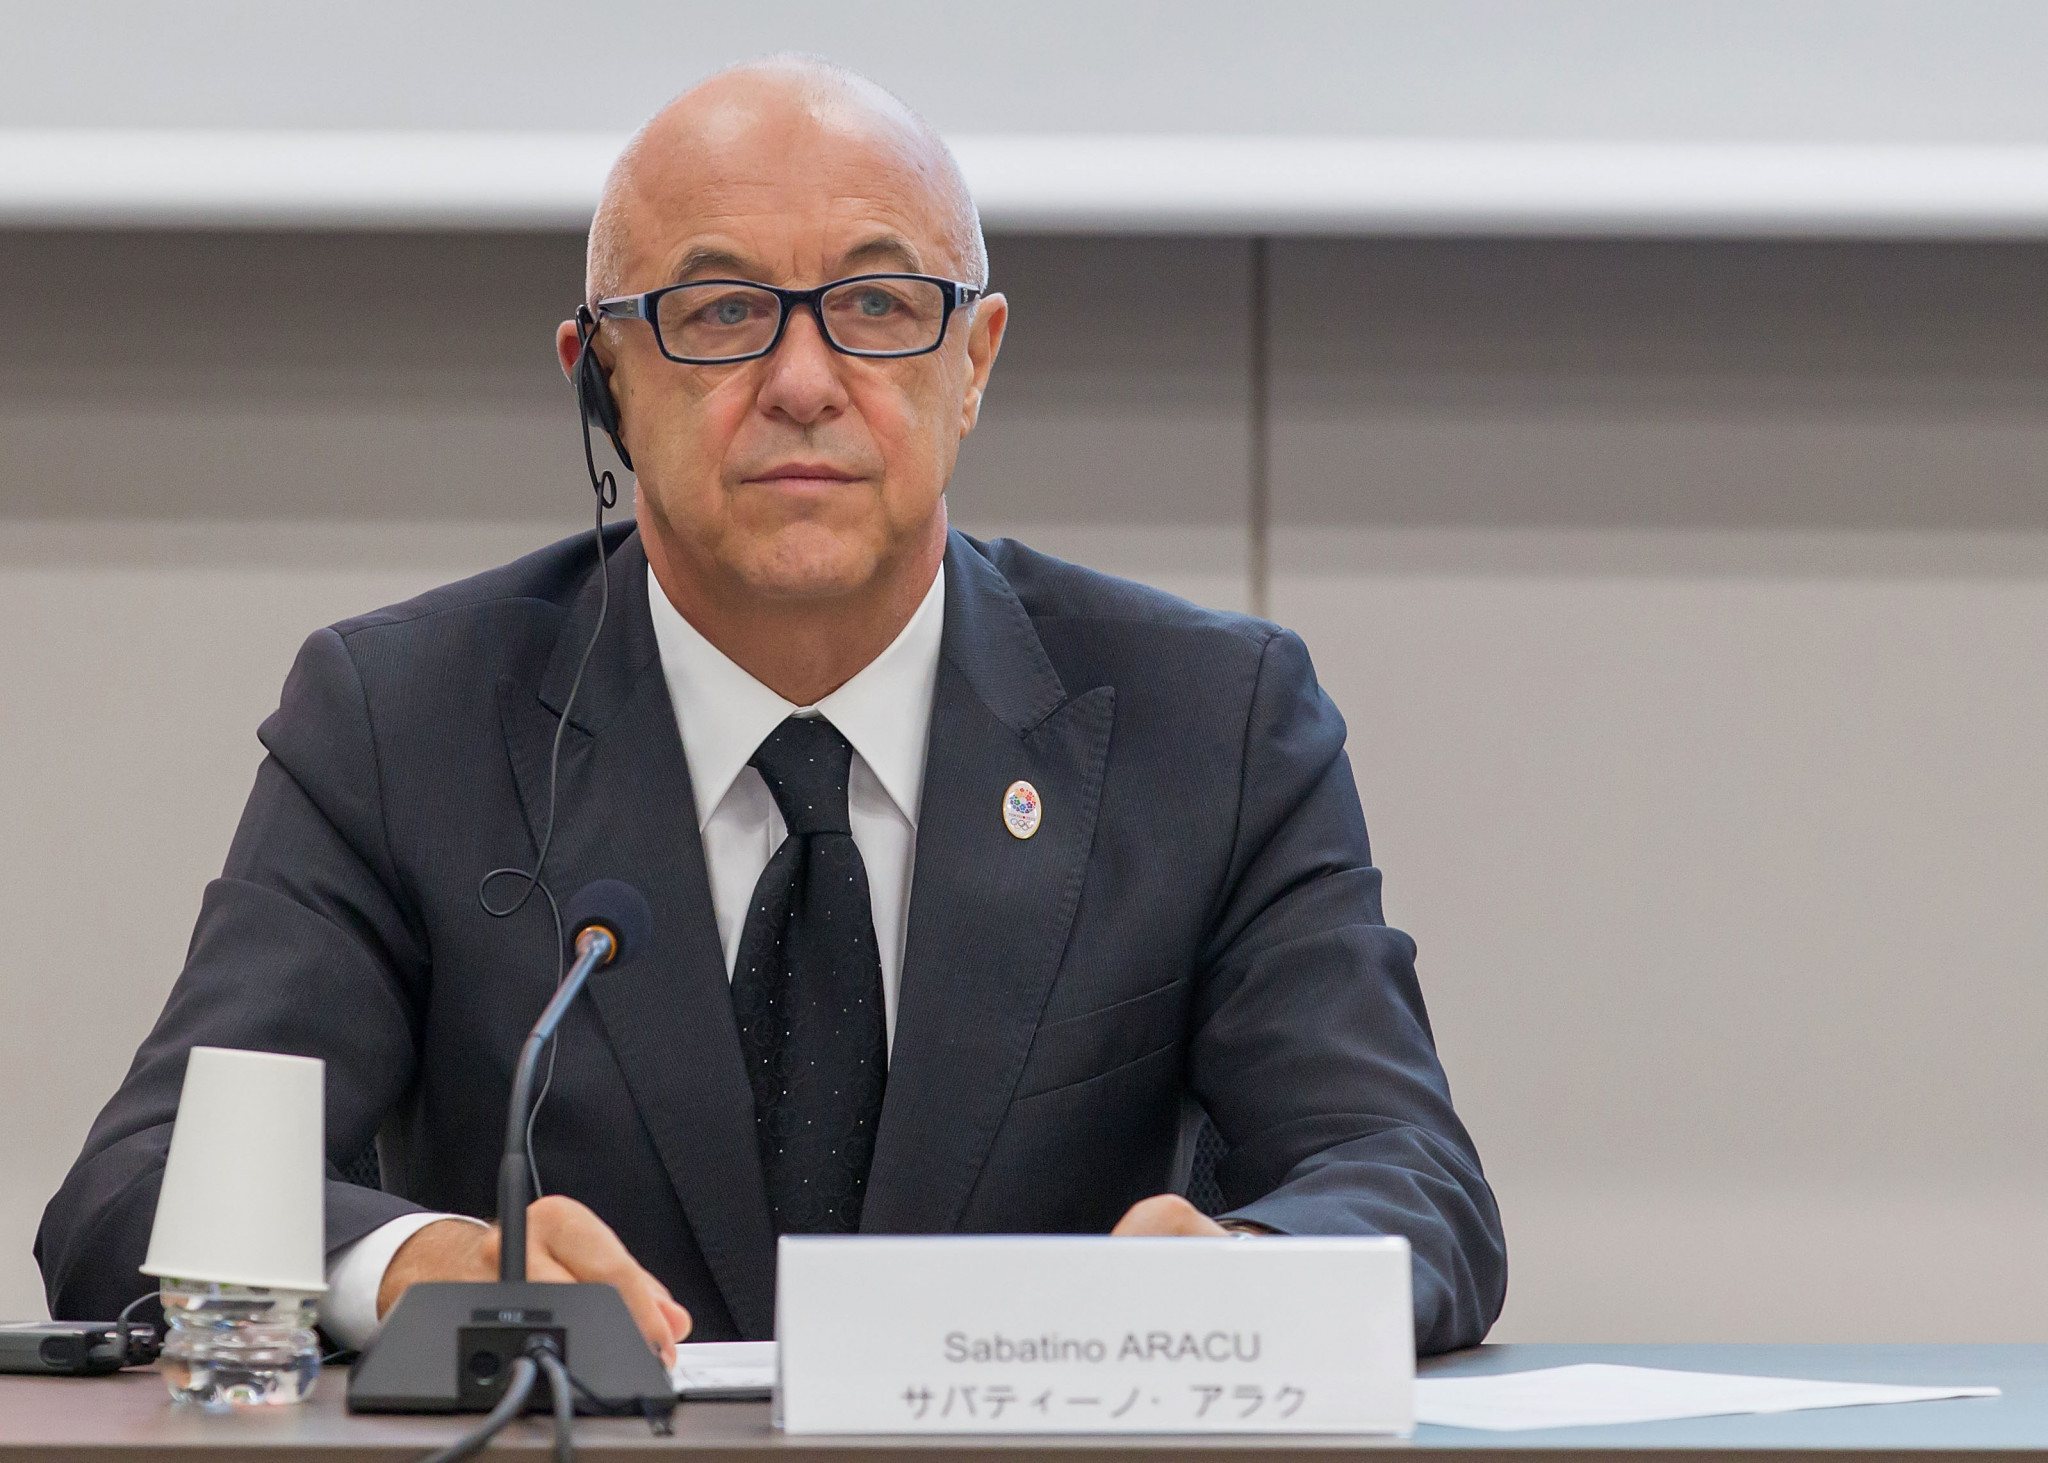 FIRS head Sabatino Aracu will remain President of World Skate ©Getty Images